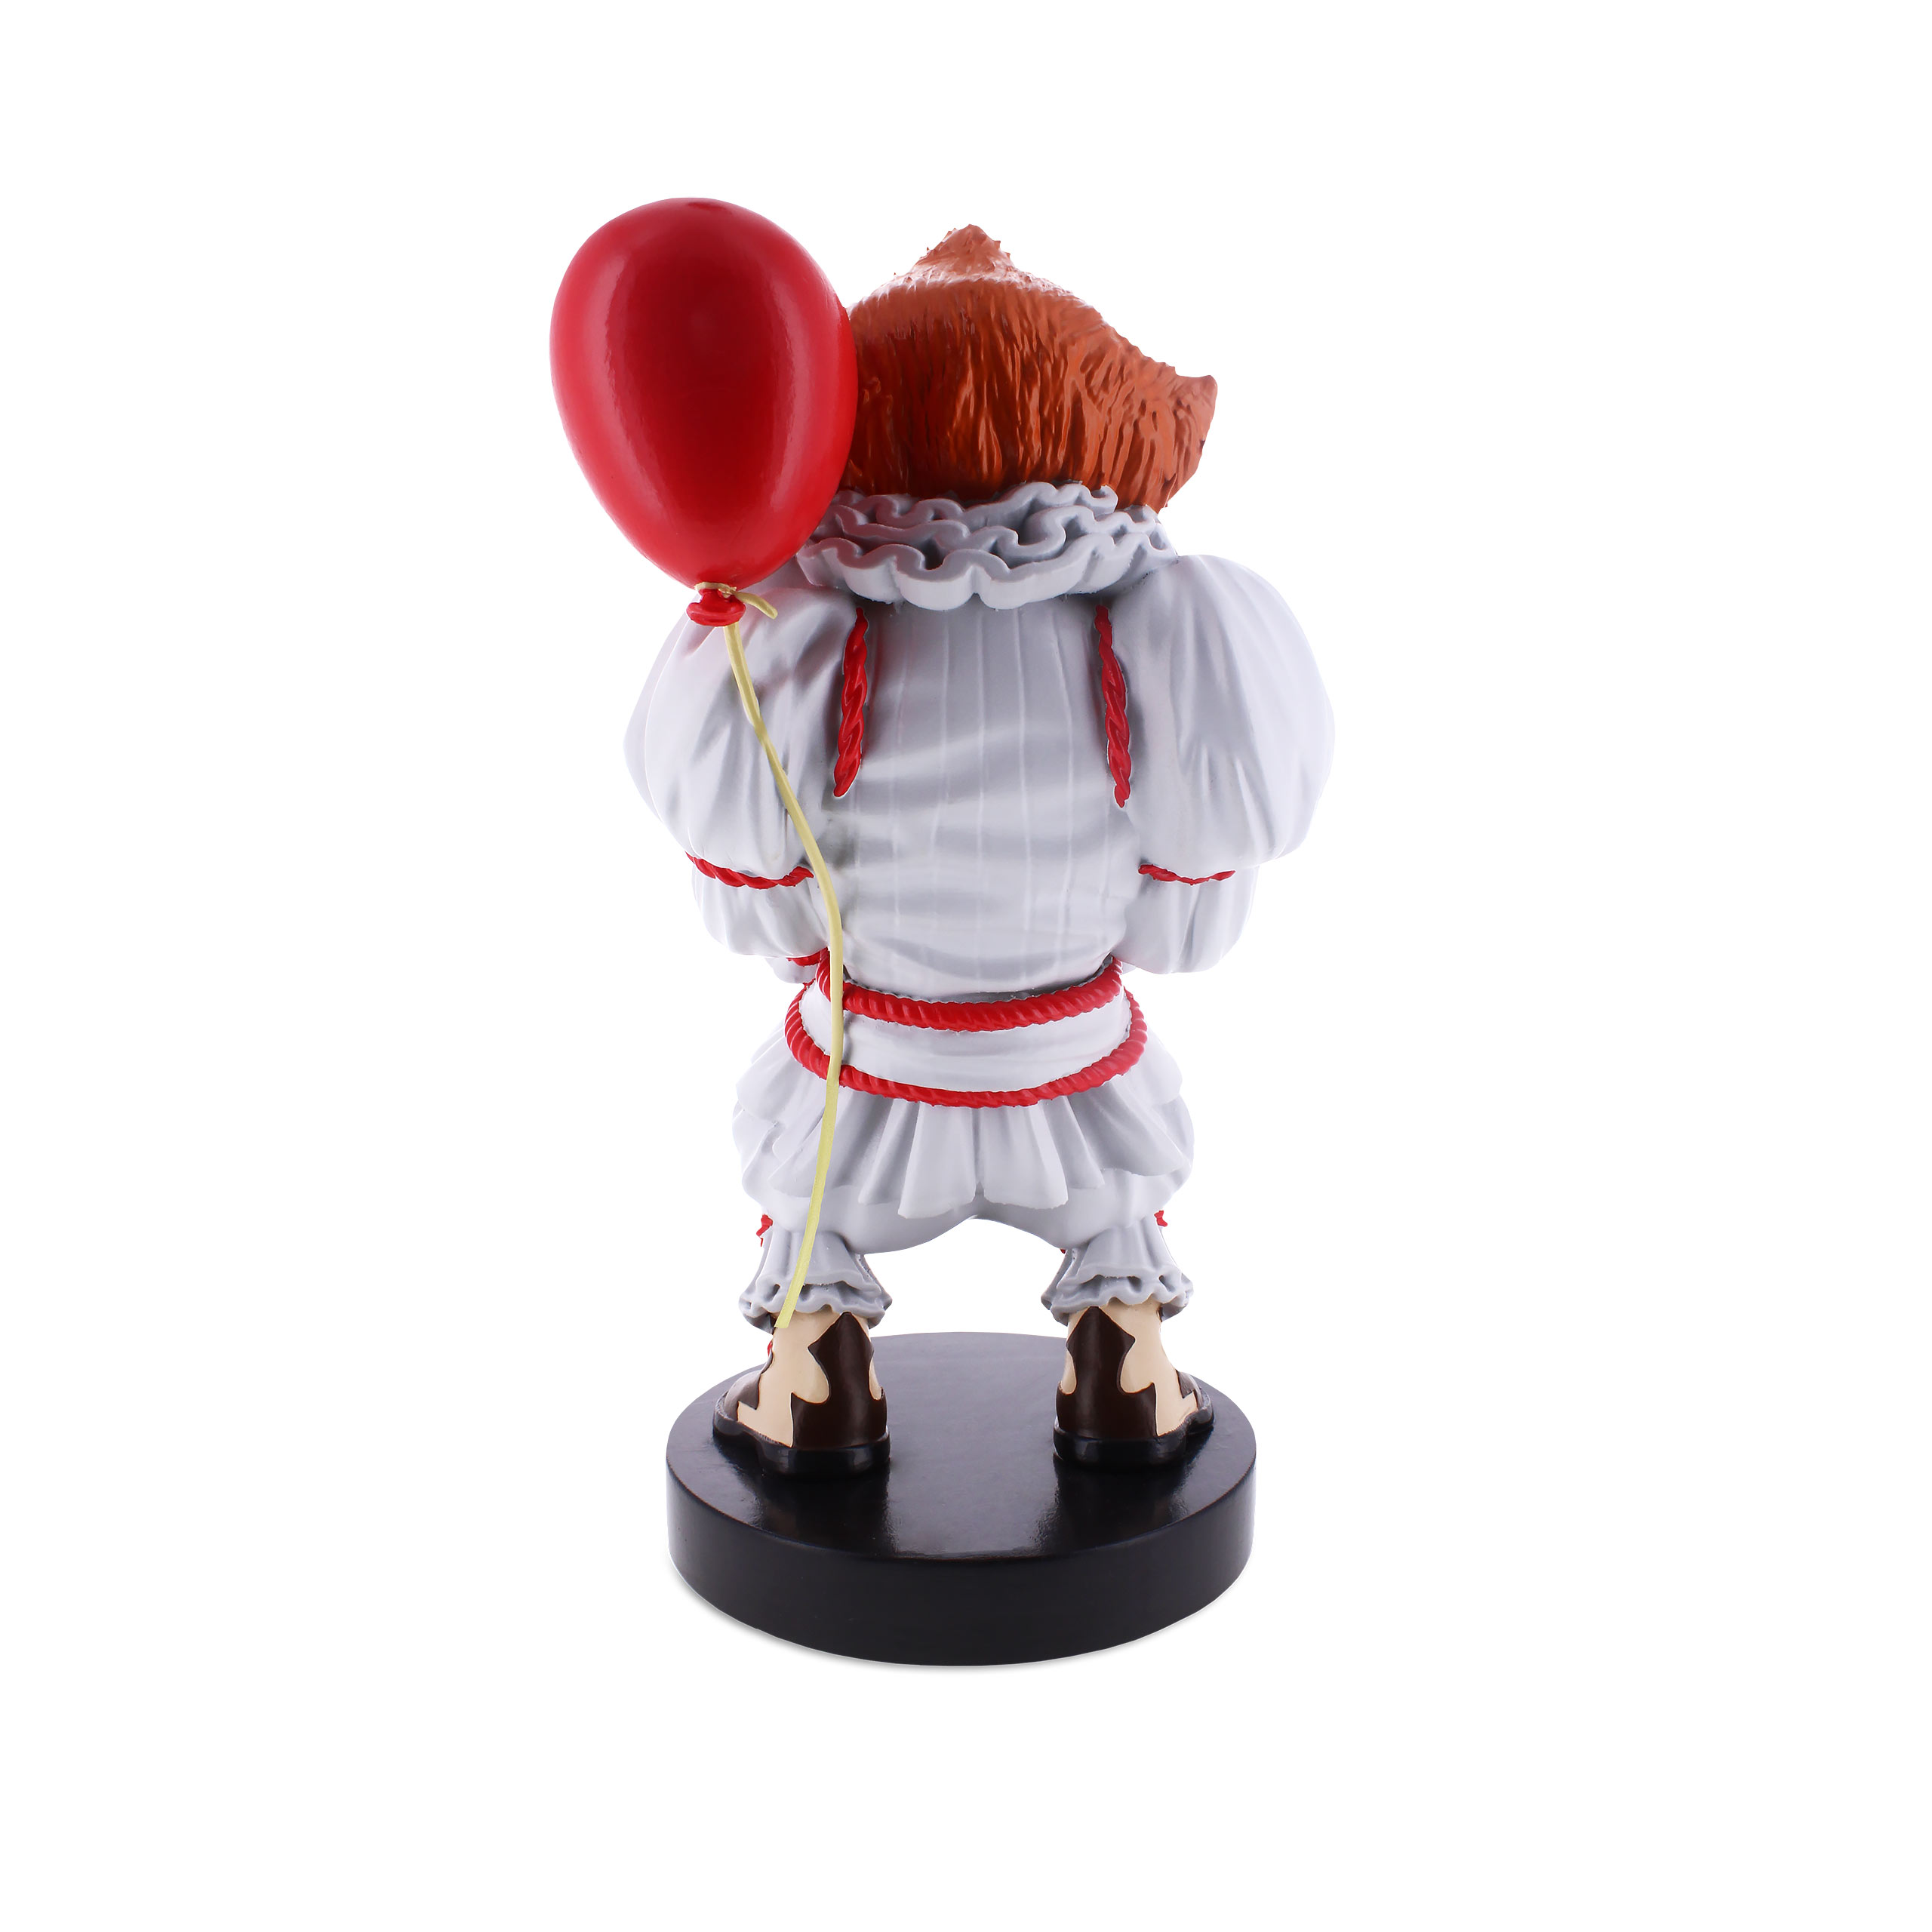 Stephen King's IT - Pennywise Cable Guy Figure